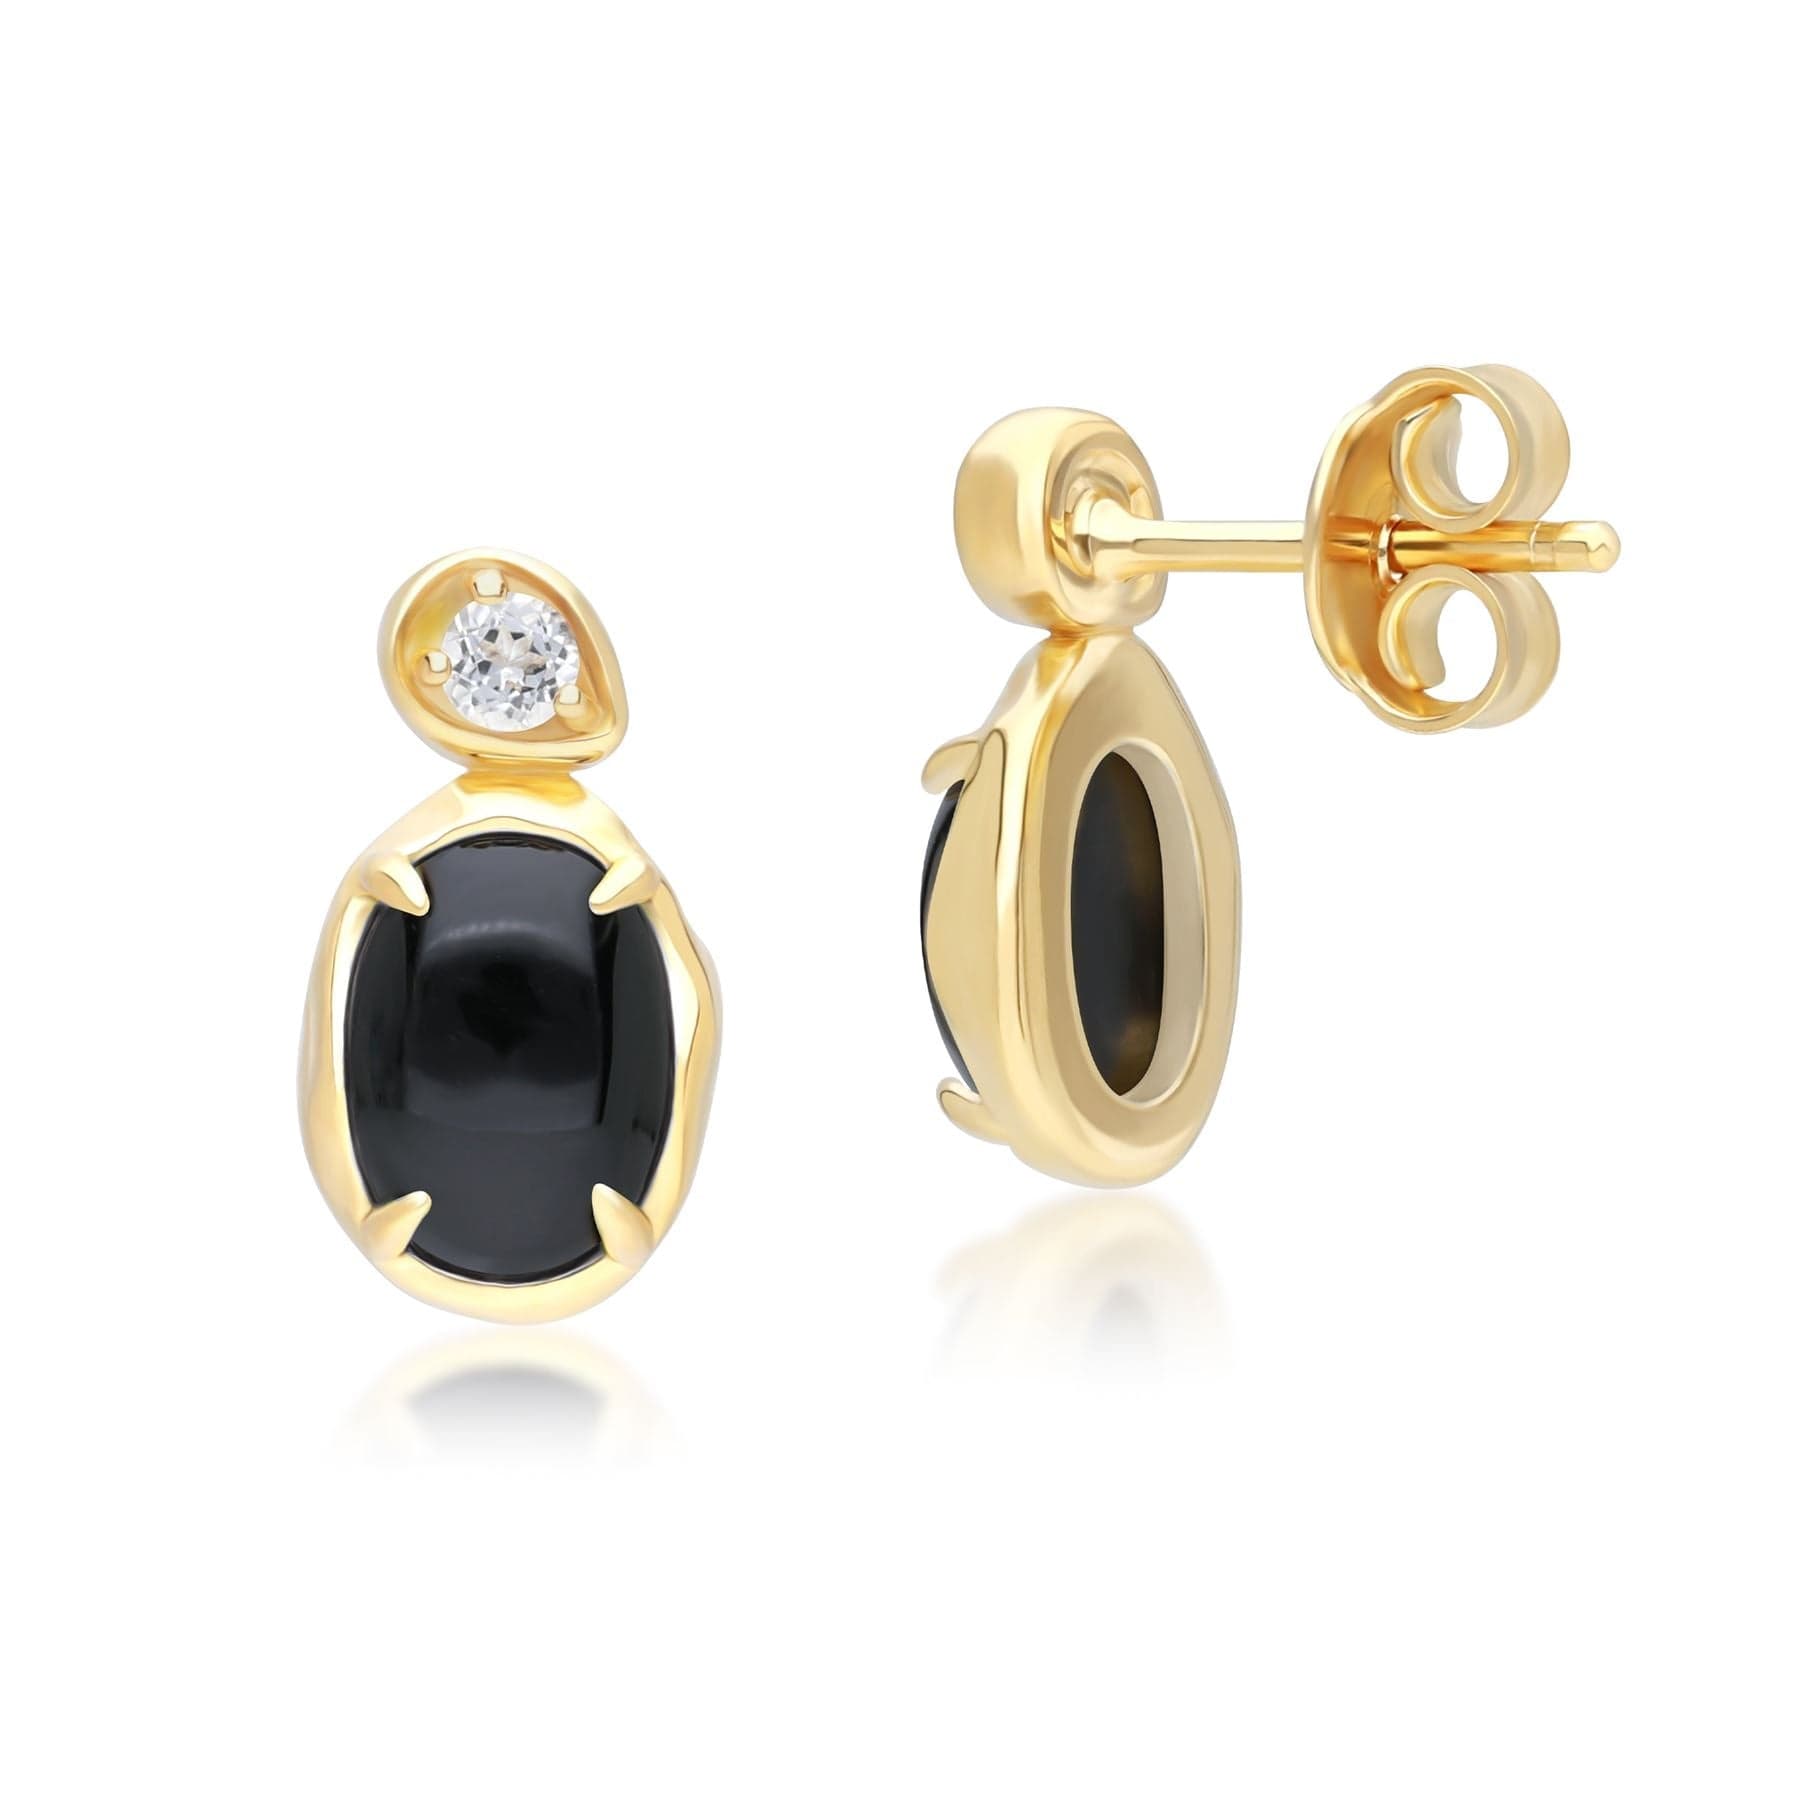 Irregular Oval Black Onyx & Topaz Drop Earrings In 18ct Gold Plated SterlIng Silver